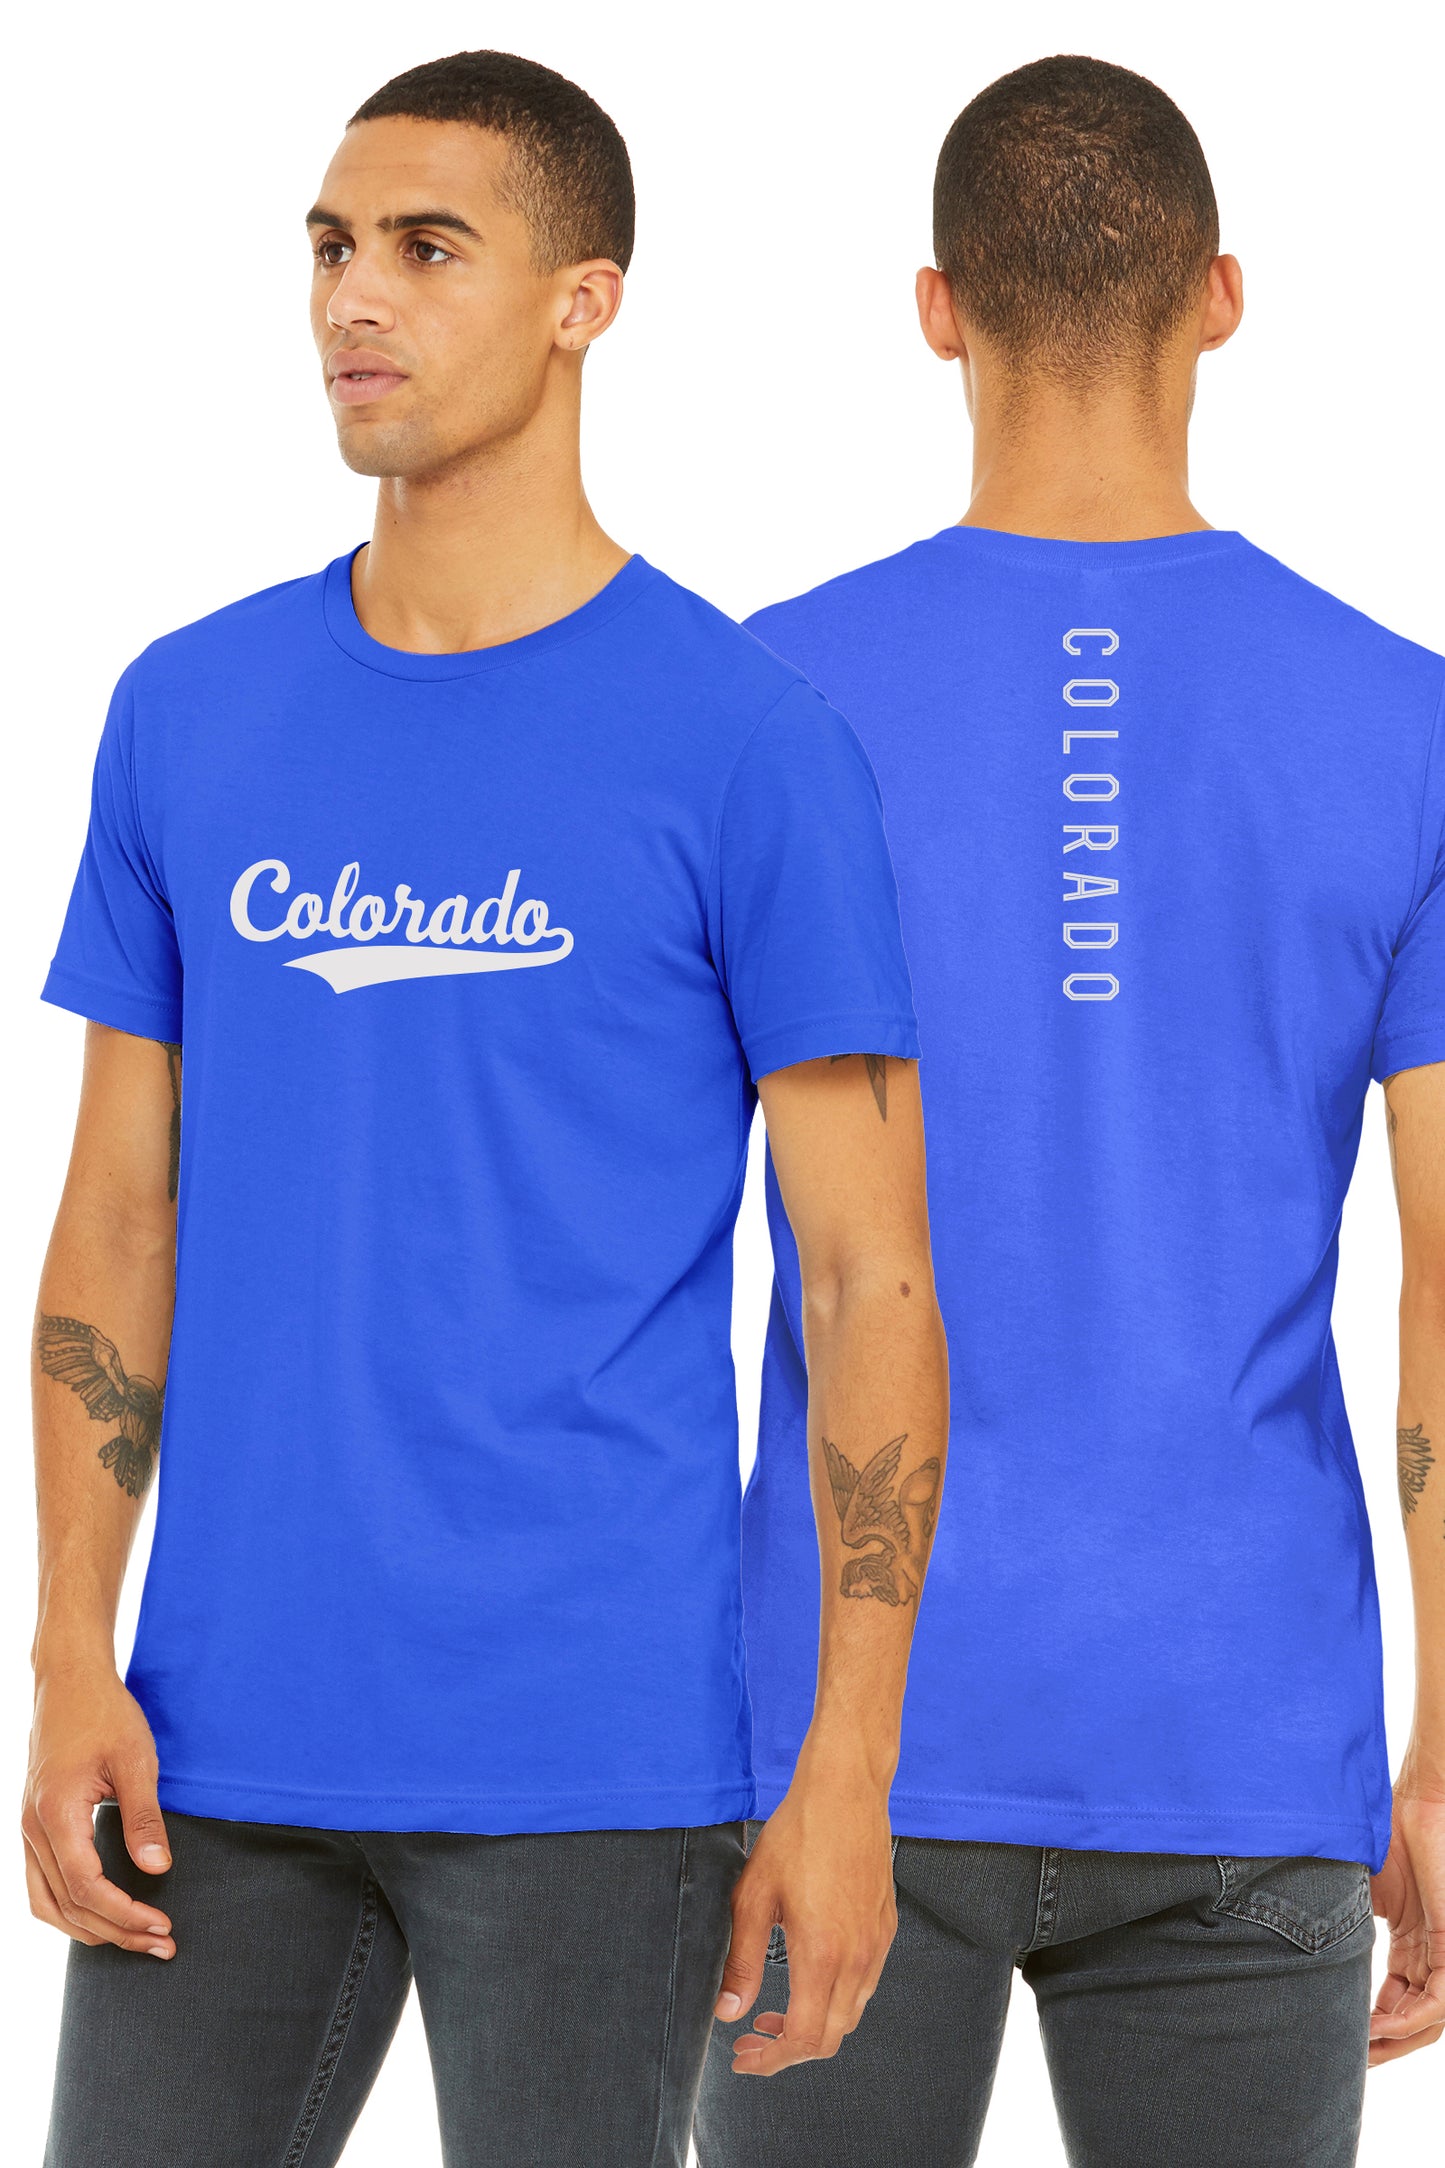 Daxton Adult Unisex Tshirt Colorado Script with Vertical on the Back